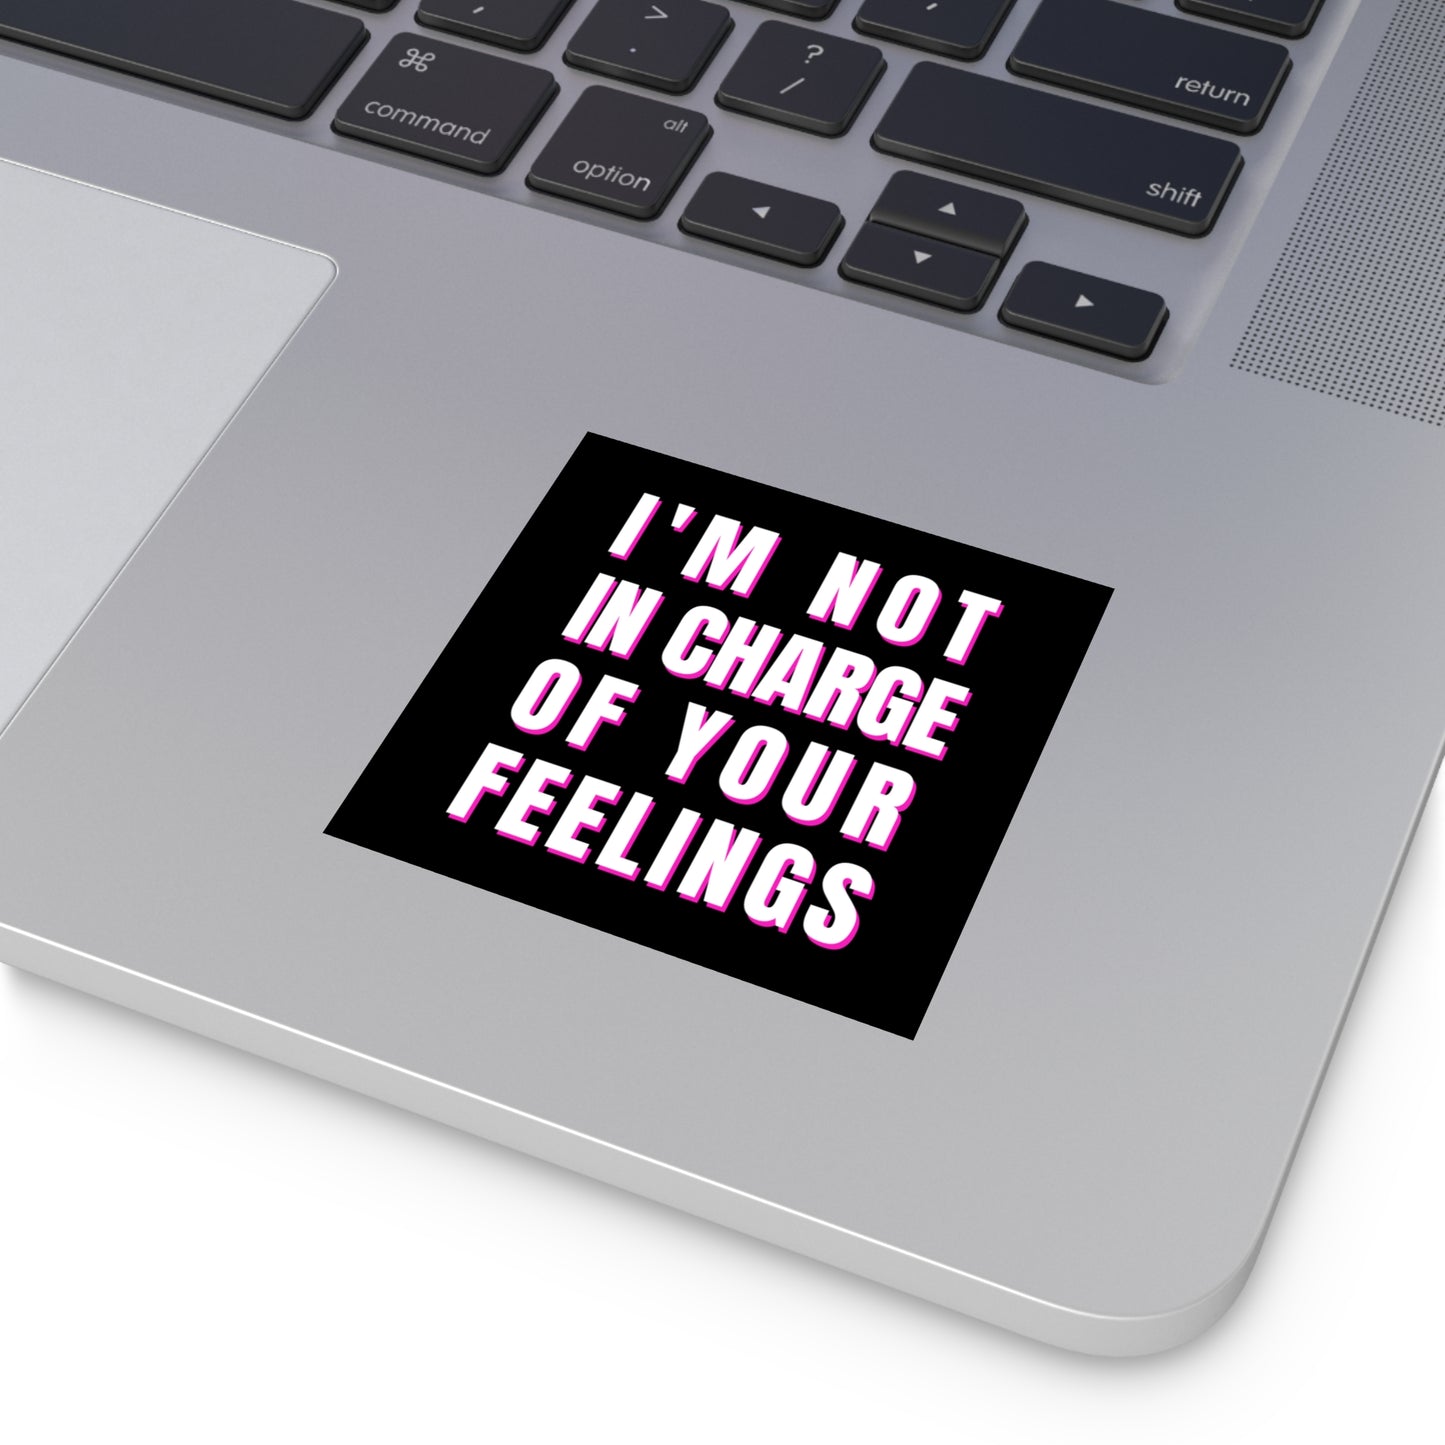 I'm Not In Charge Of Your Feelings Square Stickers, Indoor\Outdoor